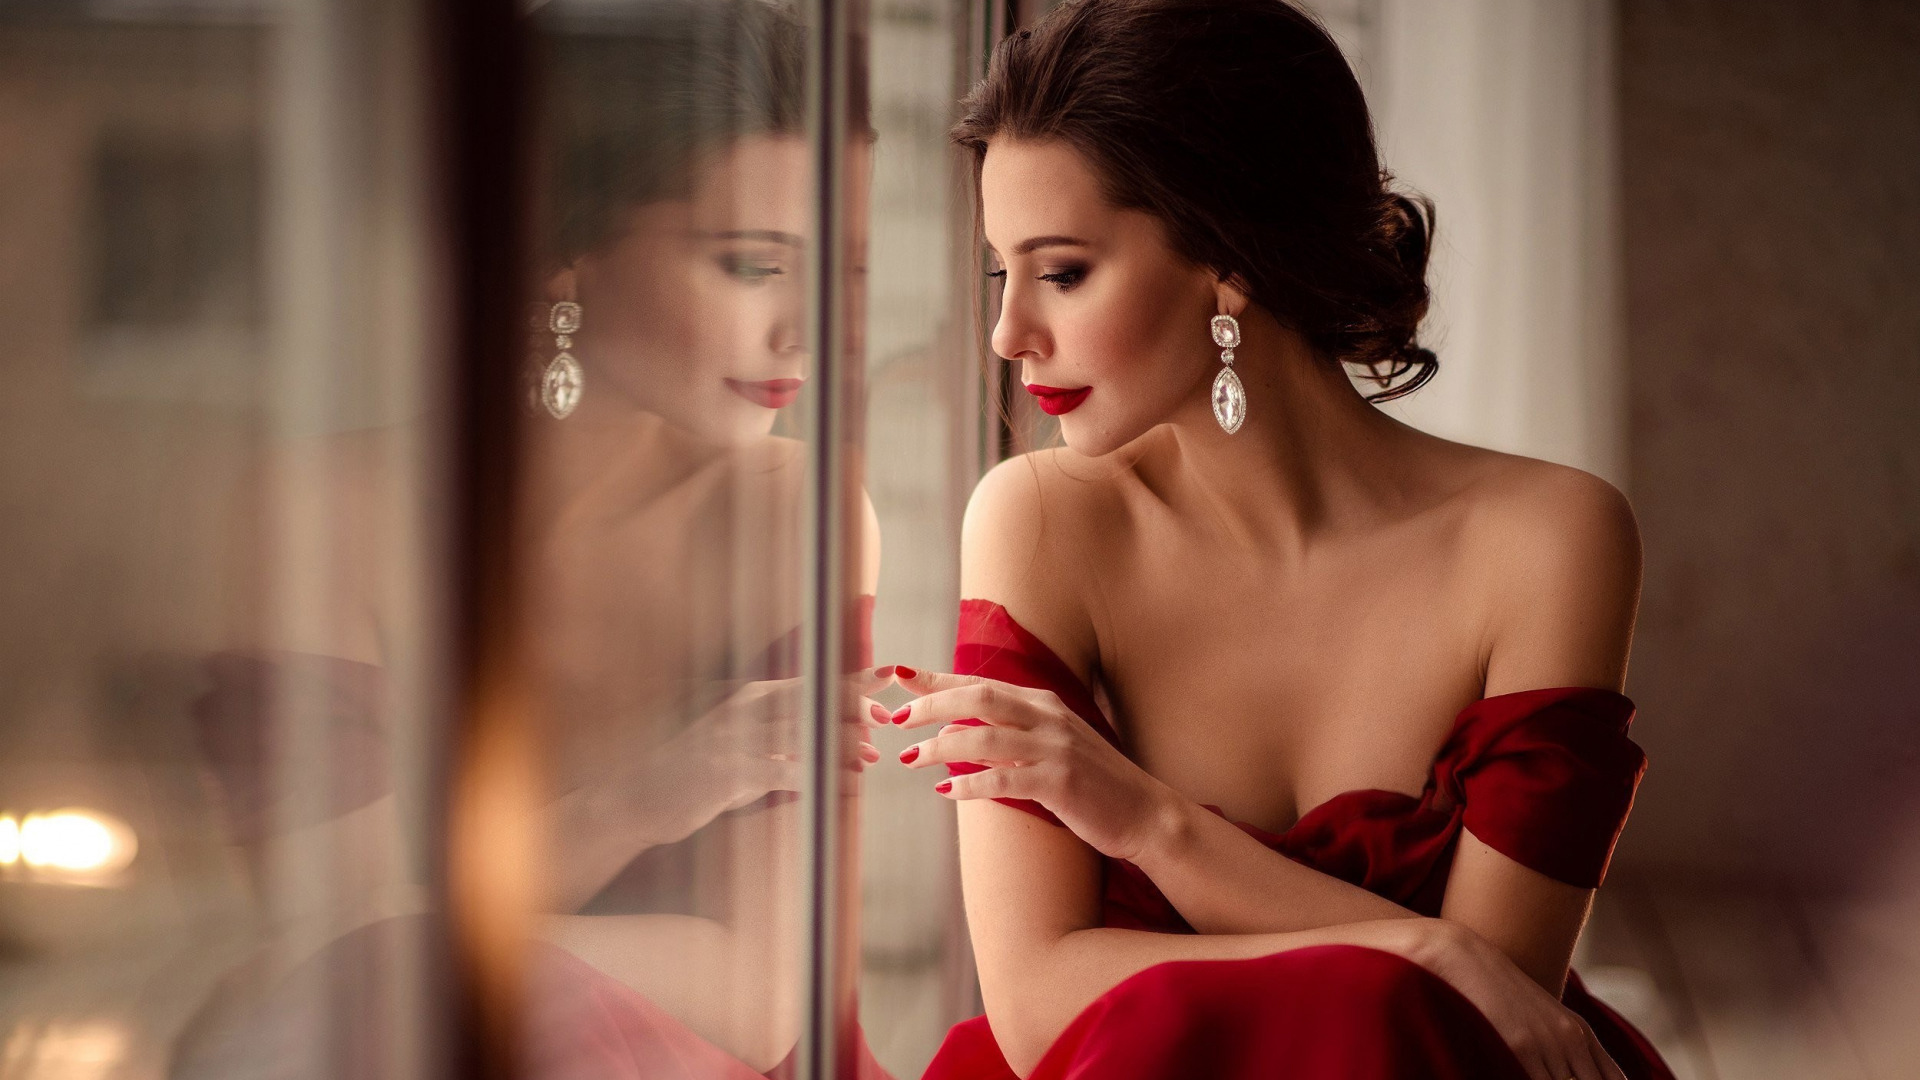 Brunette Long Earings Long Hair Reflection Red Dress Photography Bare Shoulders Earring Red Lipstick 1920x1080